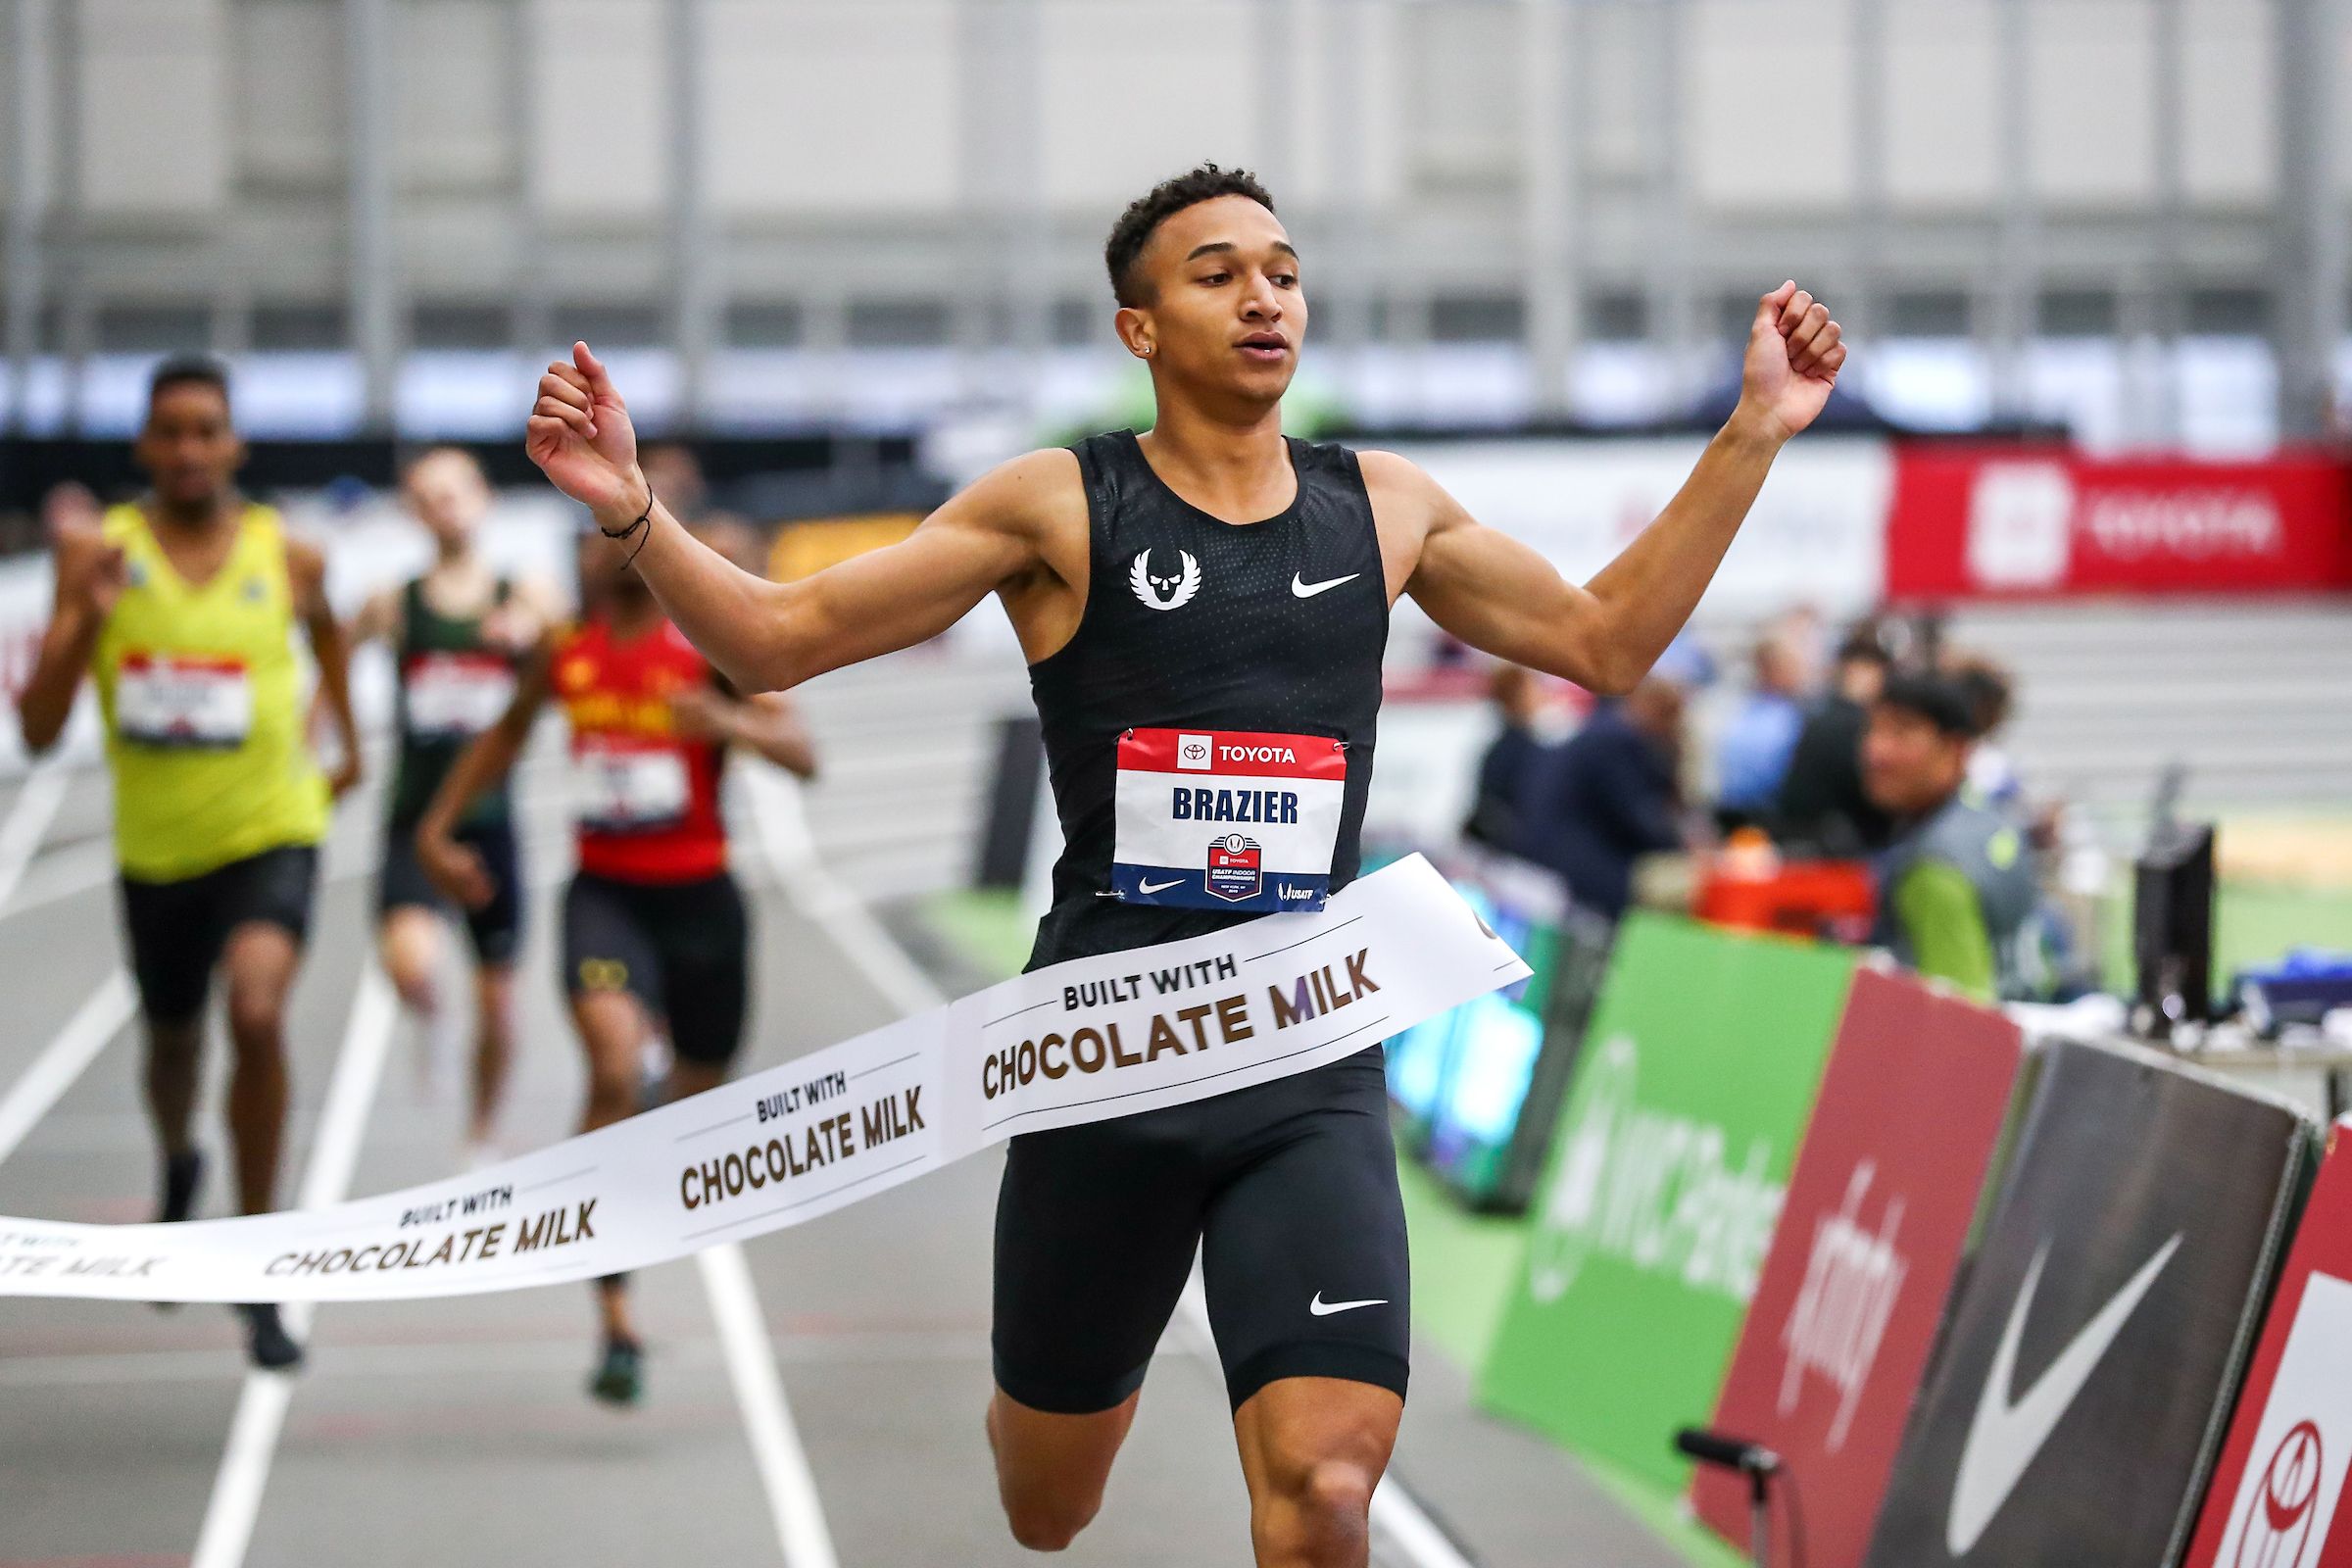 How to Watch the 2020 Millrose Games